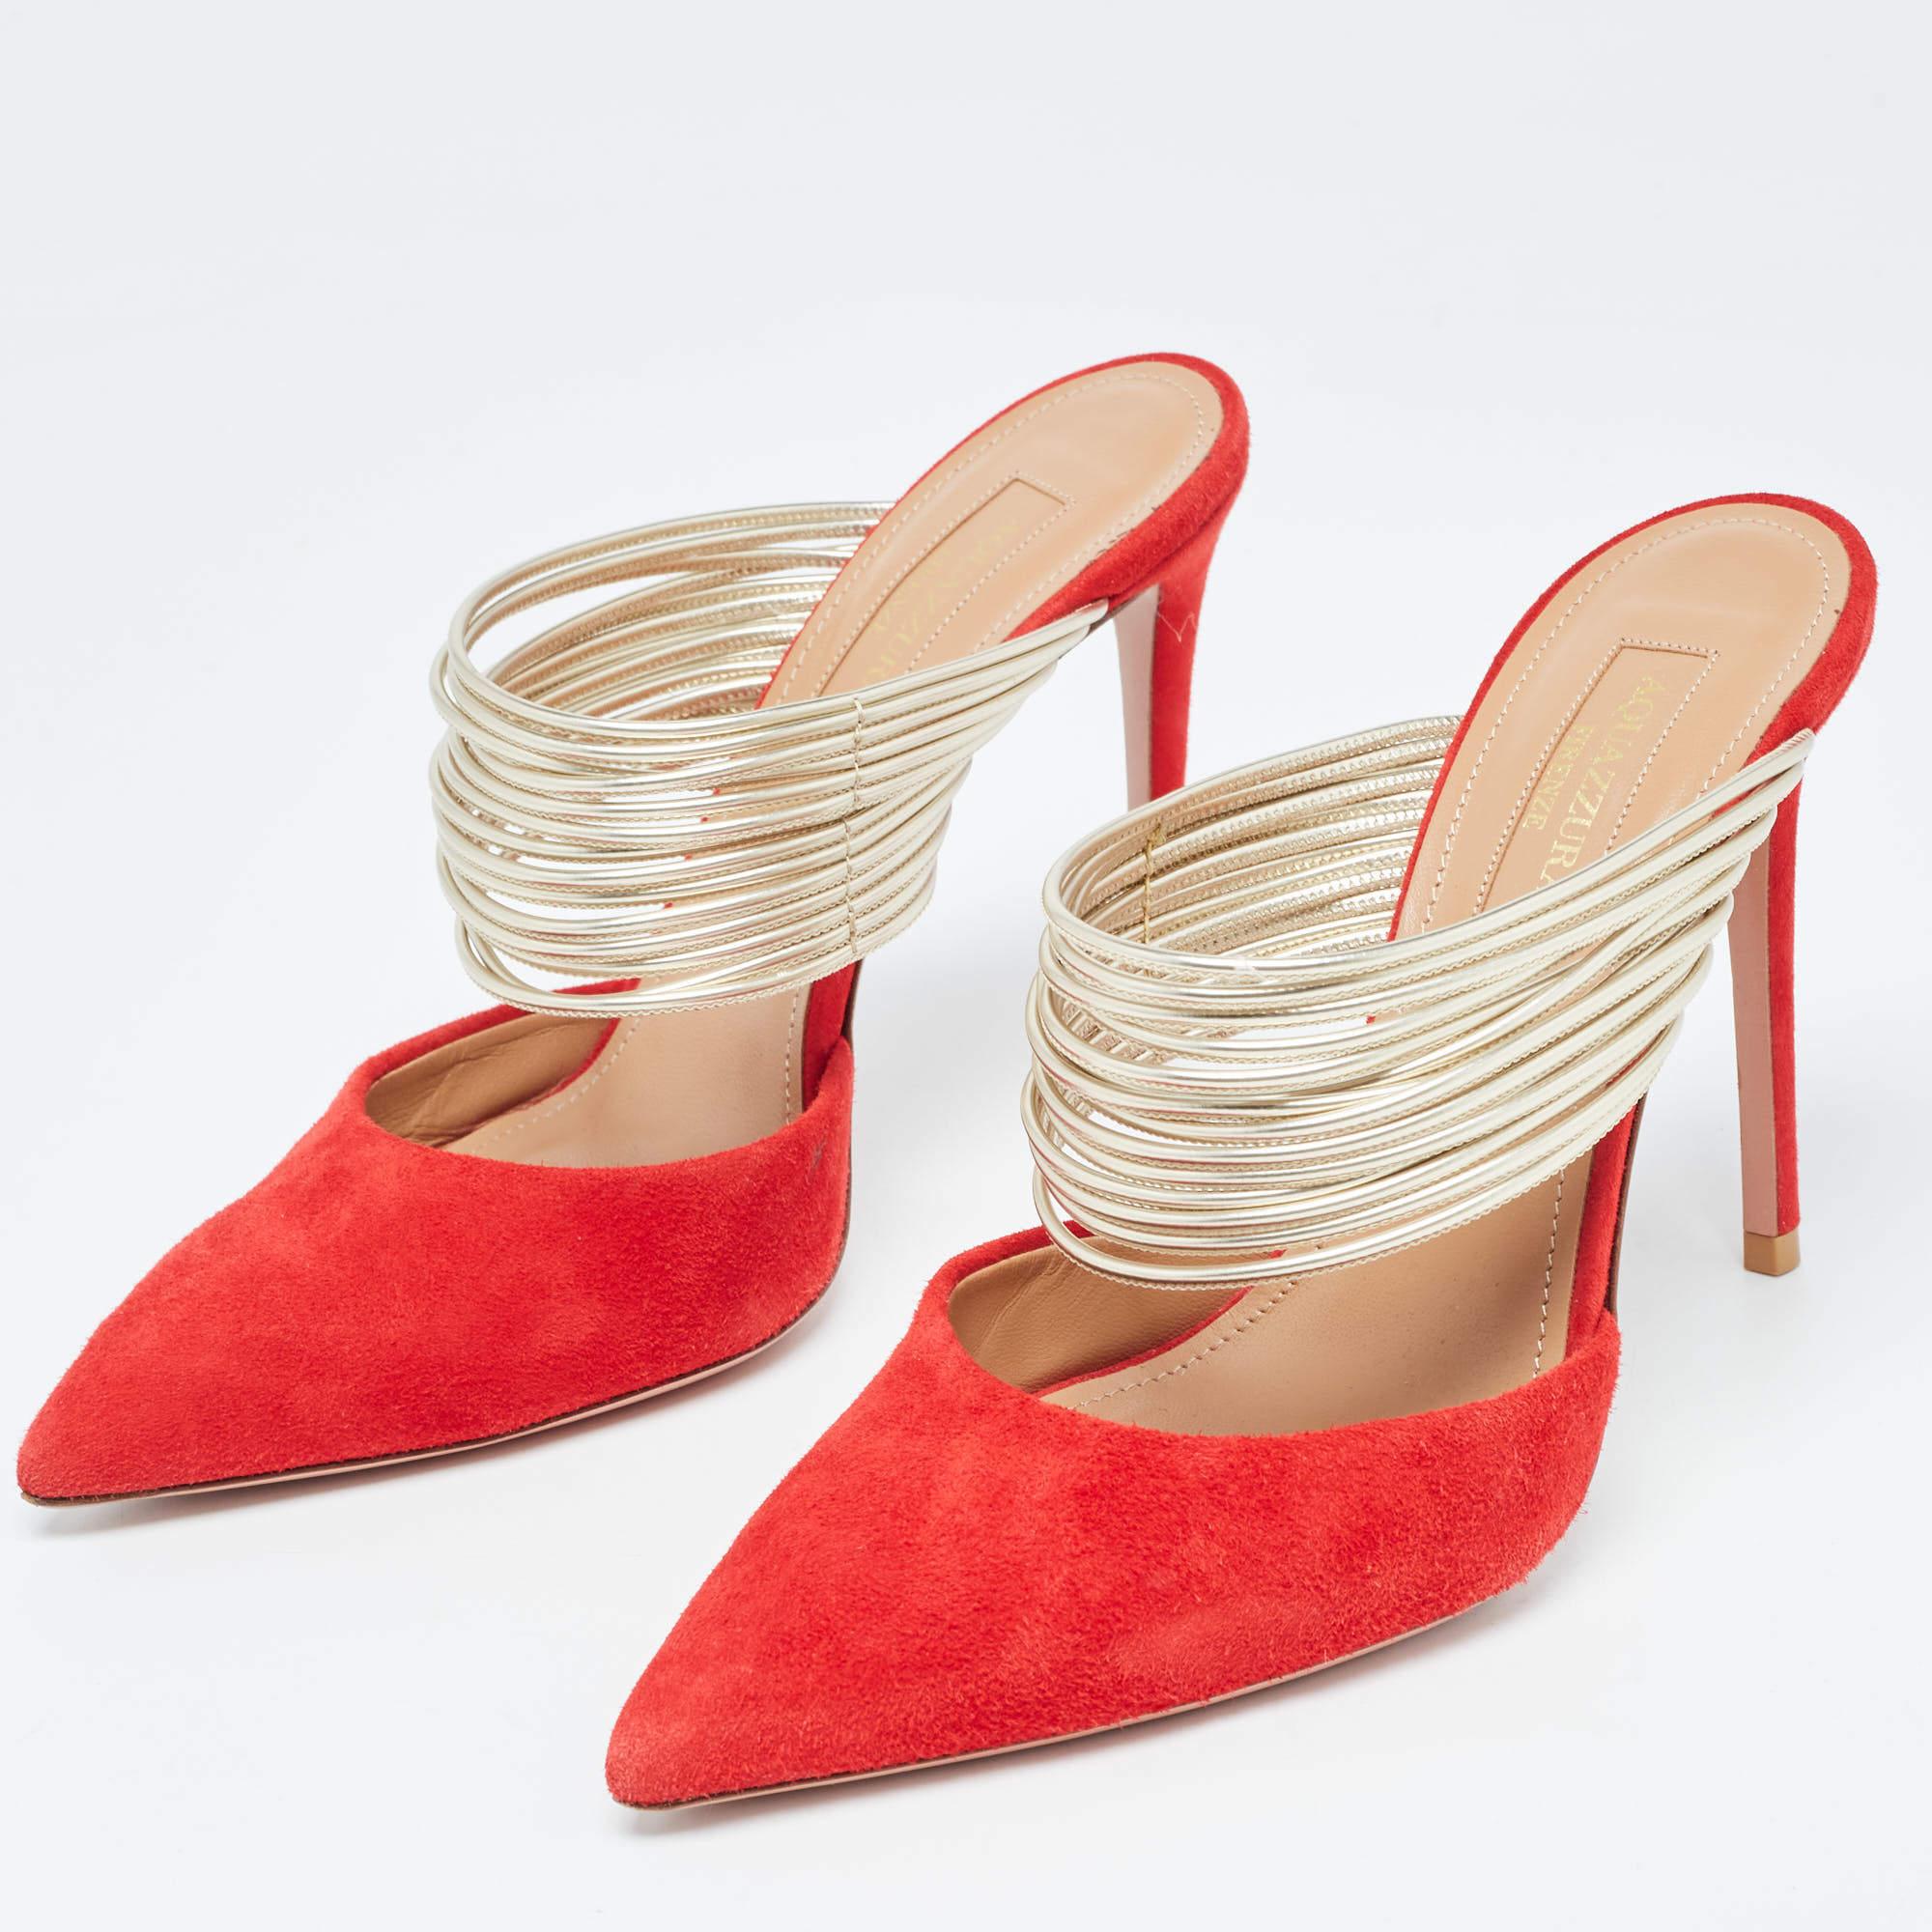 These mules from Aquazzura are attractive from every angle. Their unique exterior is sewn using red suede and gold leather with pointed toes adding shape and definition to their structure. They are placed on 11 cm heels.

